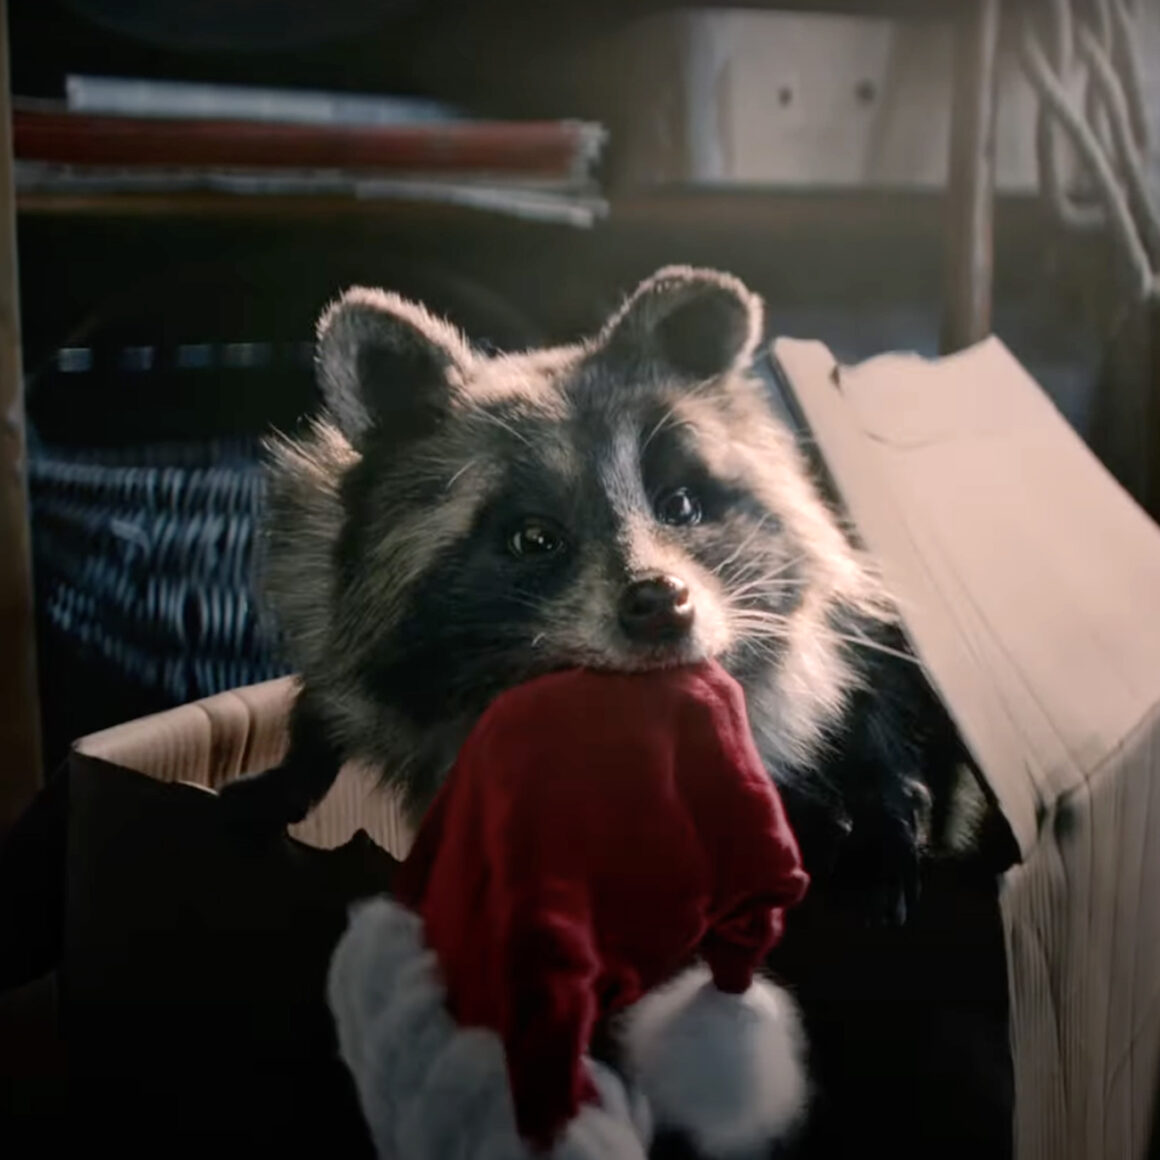 Fonte immagine A Magical Christmas with Lidl’s Christmas TV Adver (YouTube), MKTG WideSpirit